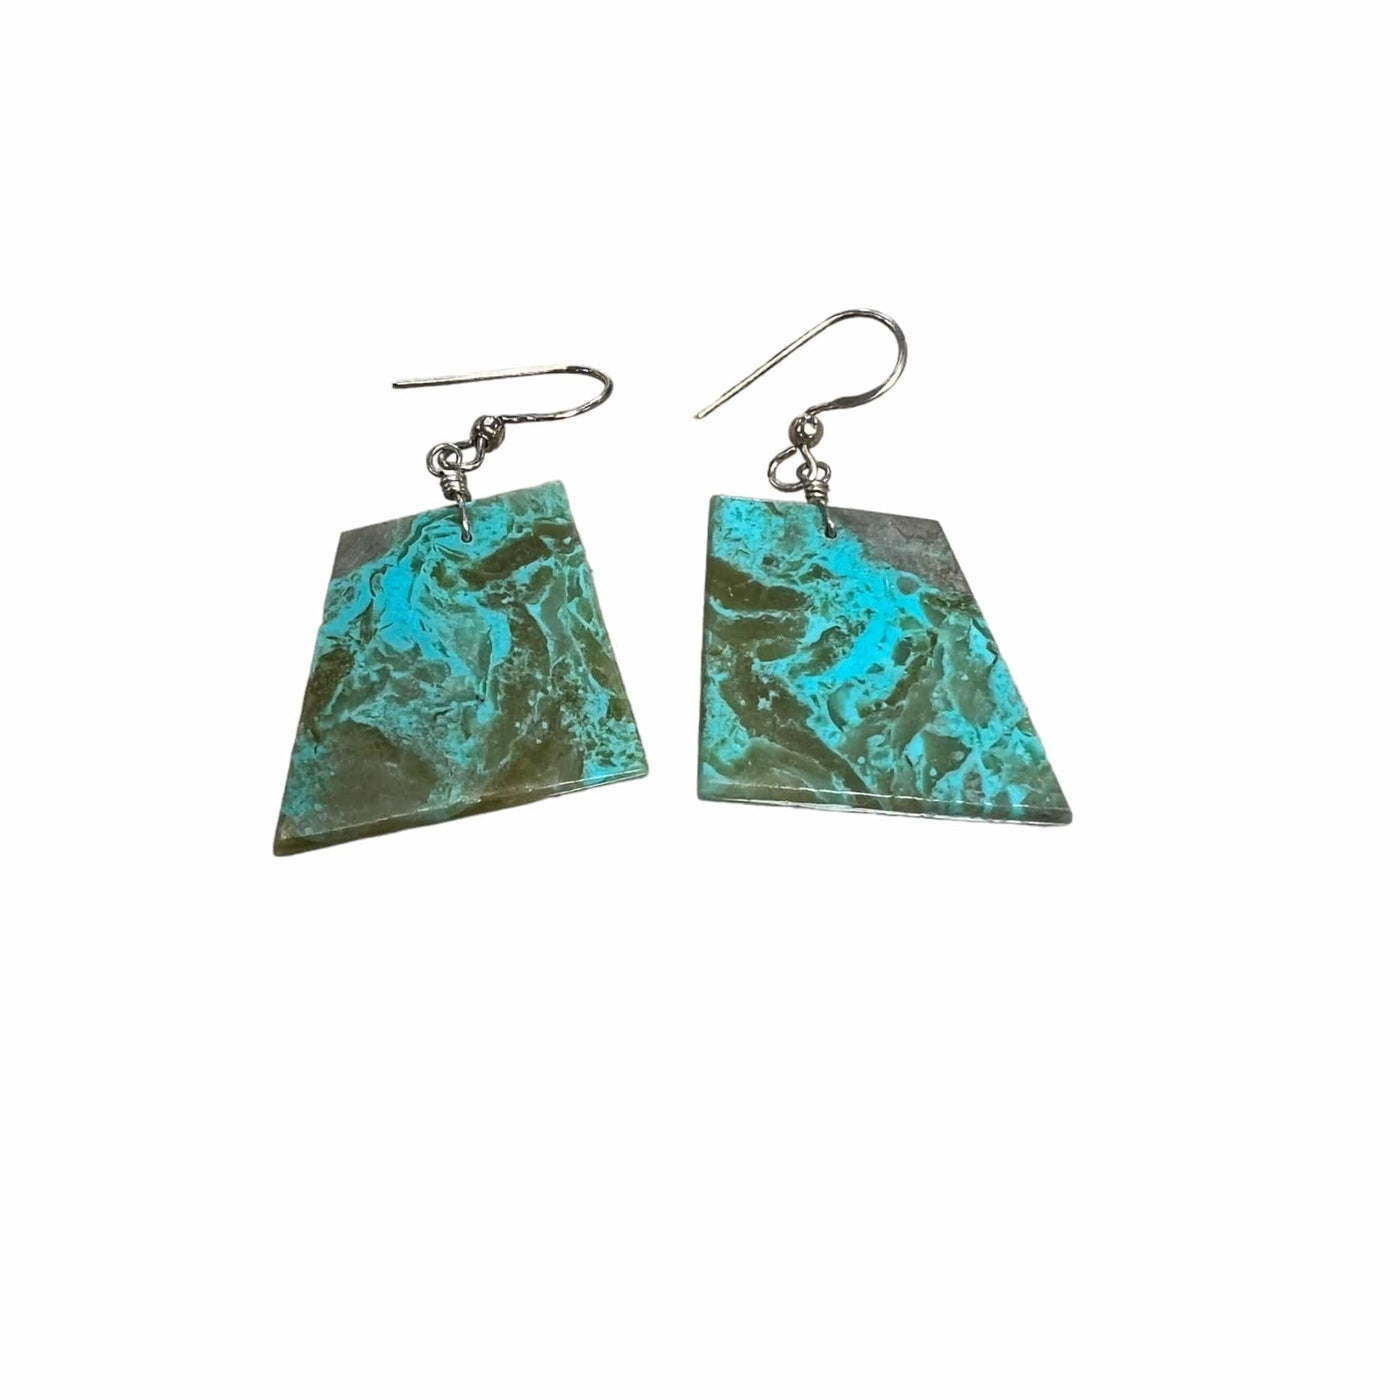 pair of turquoise earrings on white background